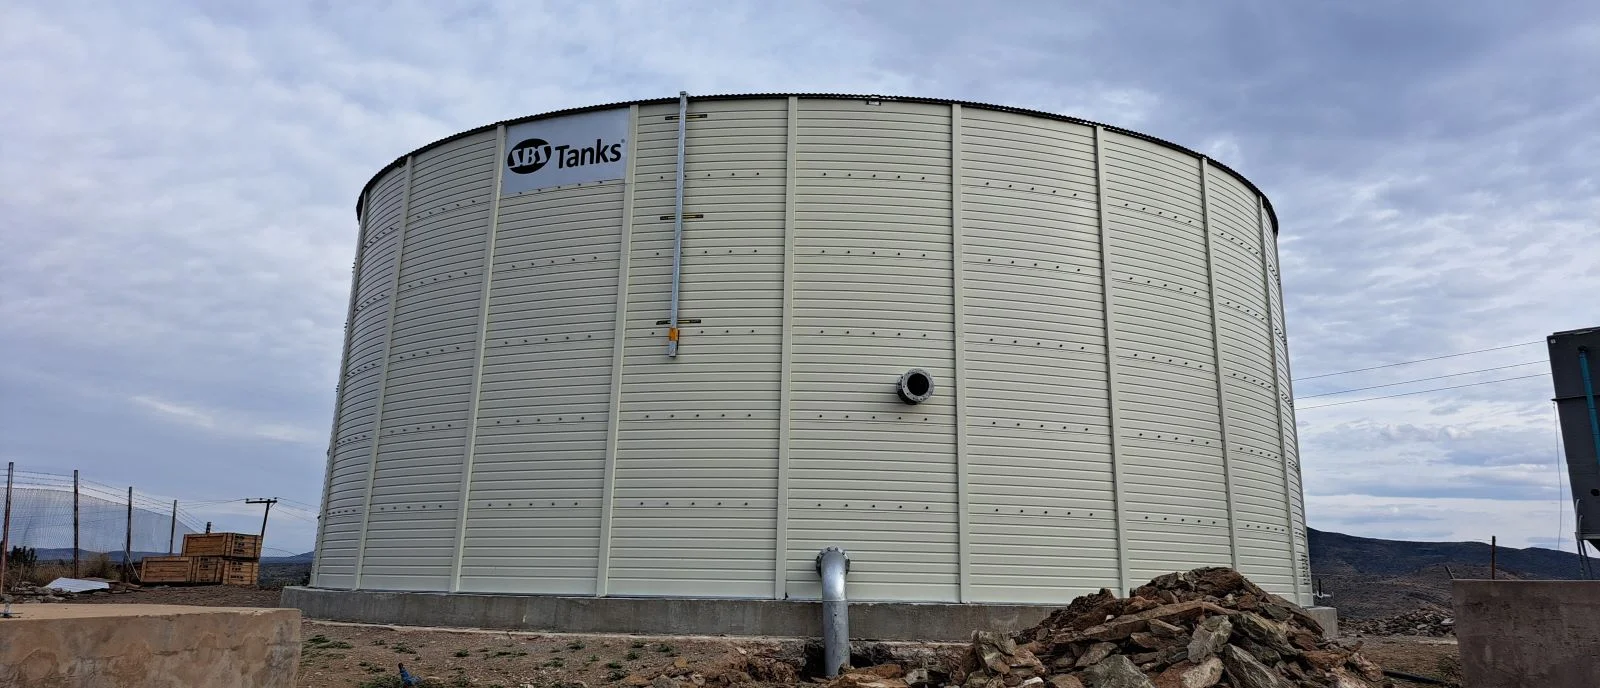 Double Win – SBS Tanks brings water security to two communities at once